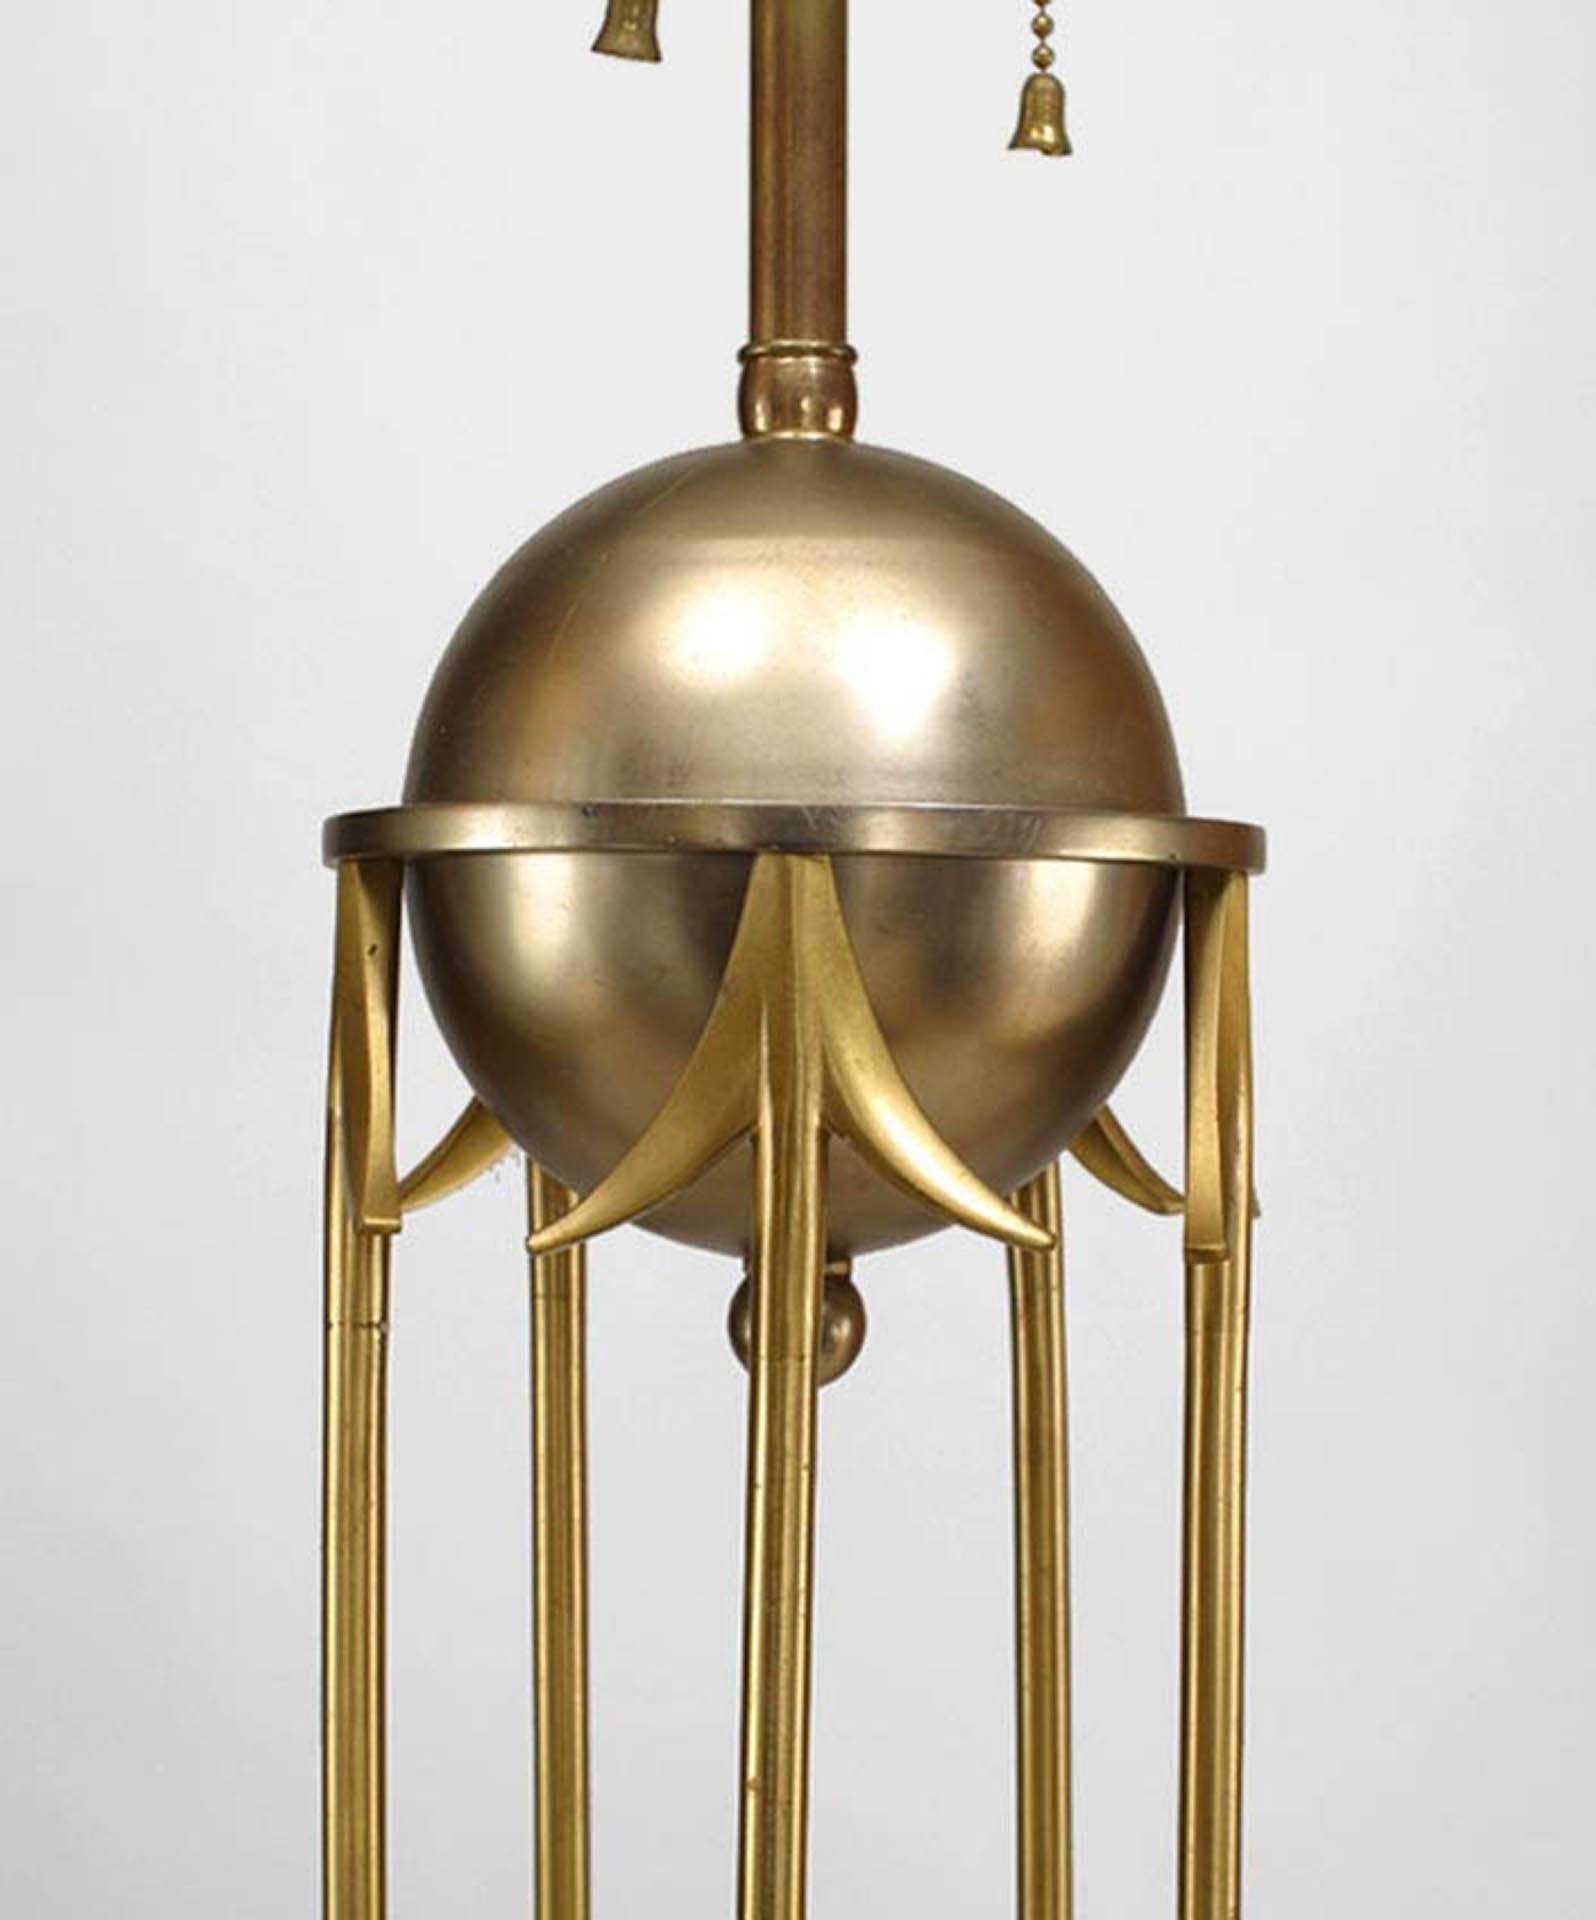 Streamlined Moderne Pair of American Art Moderne 1950s Steel and Brass Table Lamps